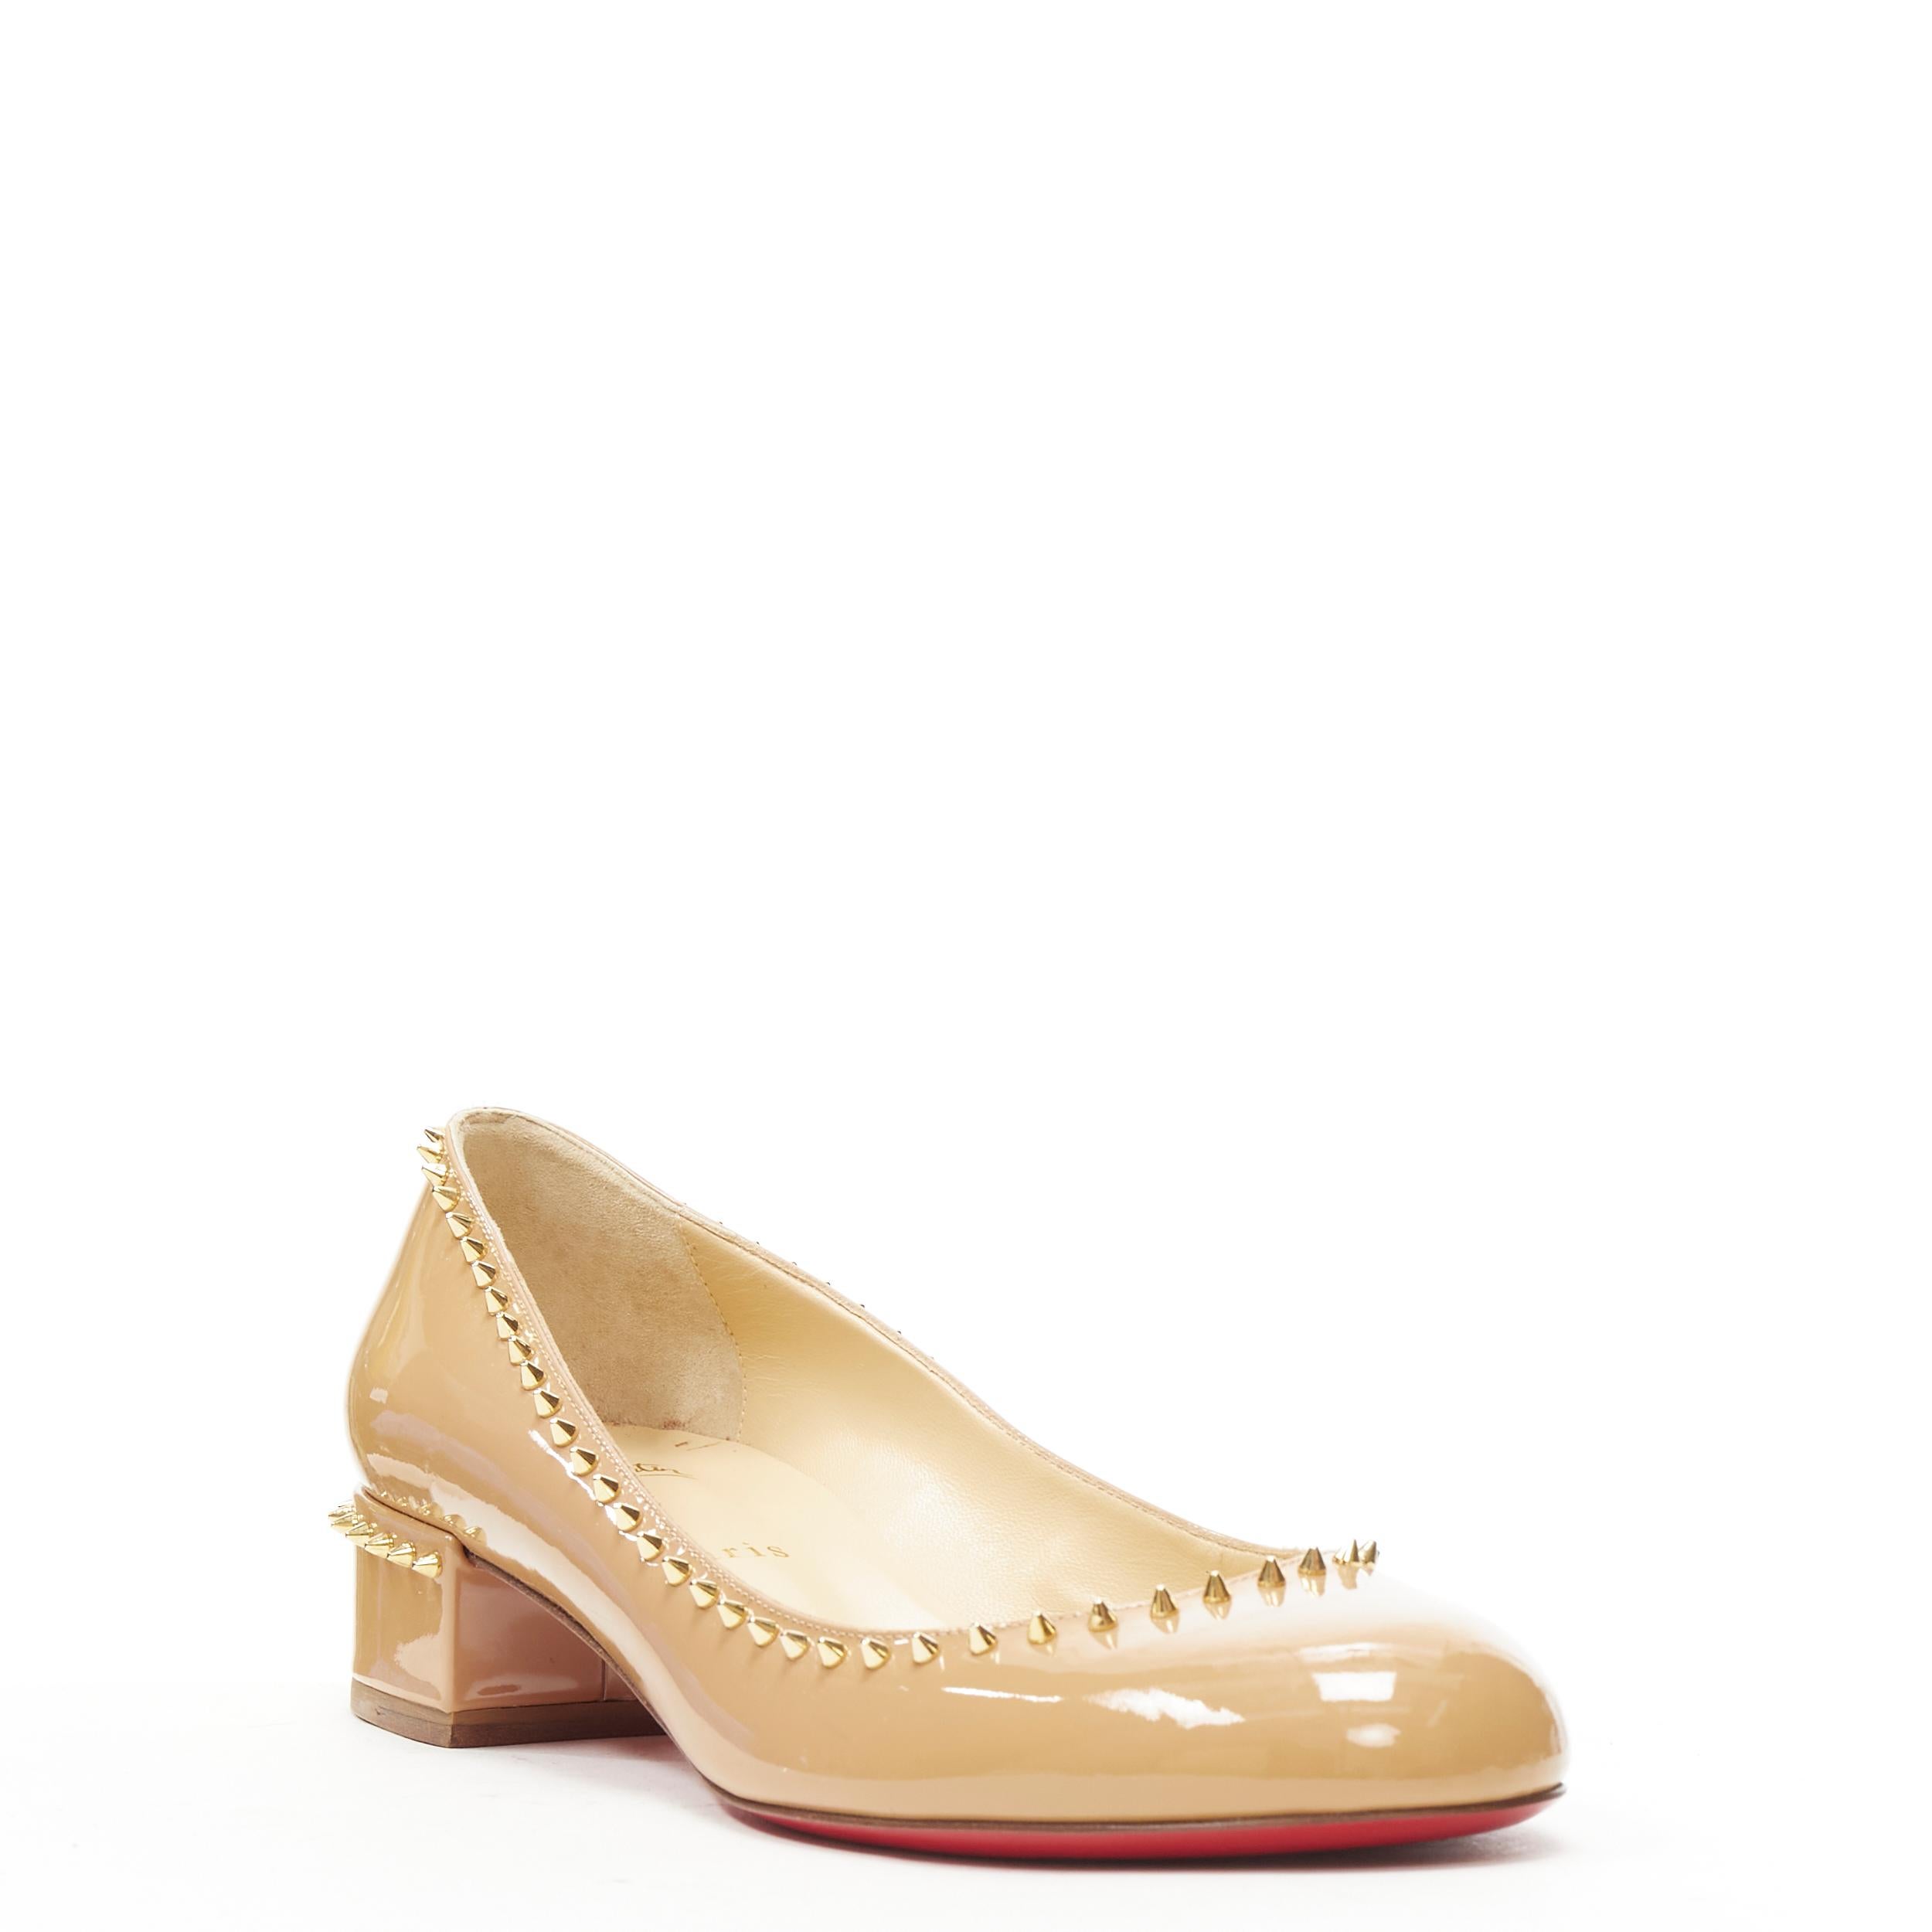 new CHRISTIAN LOUBOUTIN Trelilane 30 nude patent gold spike stud pump EU37.5 
Reference: TGAS/B01271 
Brand: Christian Louboutin 
Designer: Christian Louboutin 
Model: Trelilane 30 
Material: Patent Leather 
Color: Beige 
Pattern: Solid 
Extra